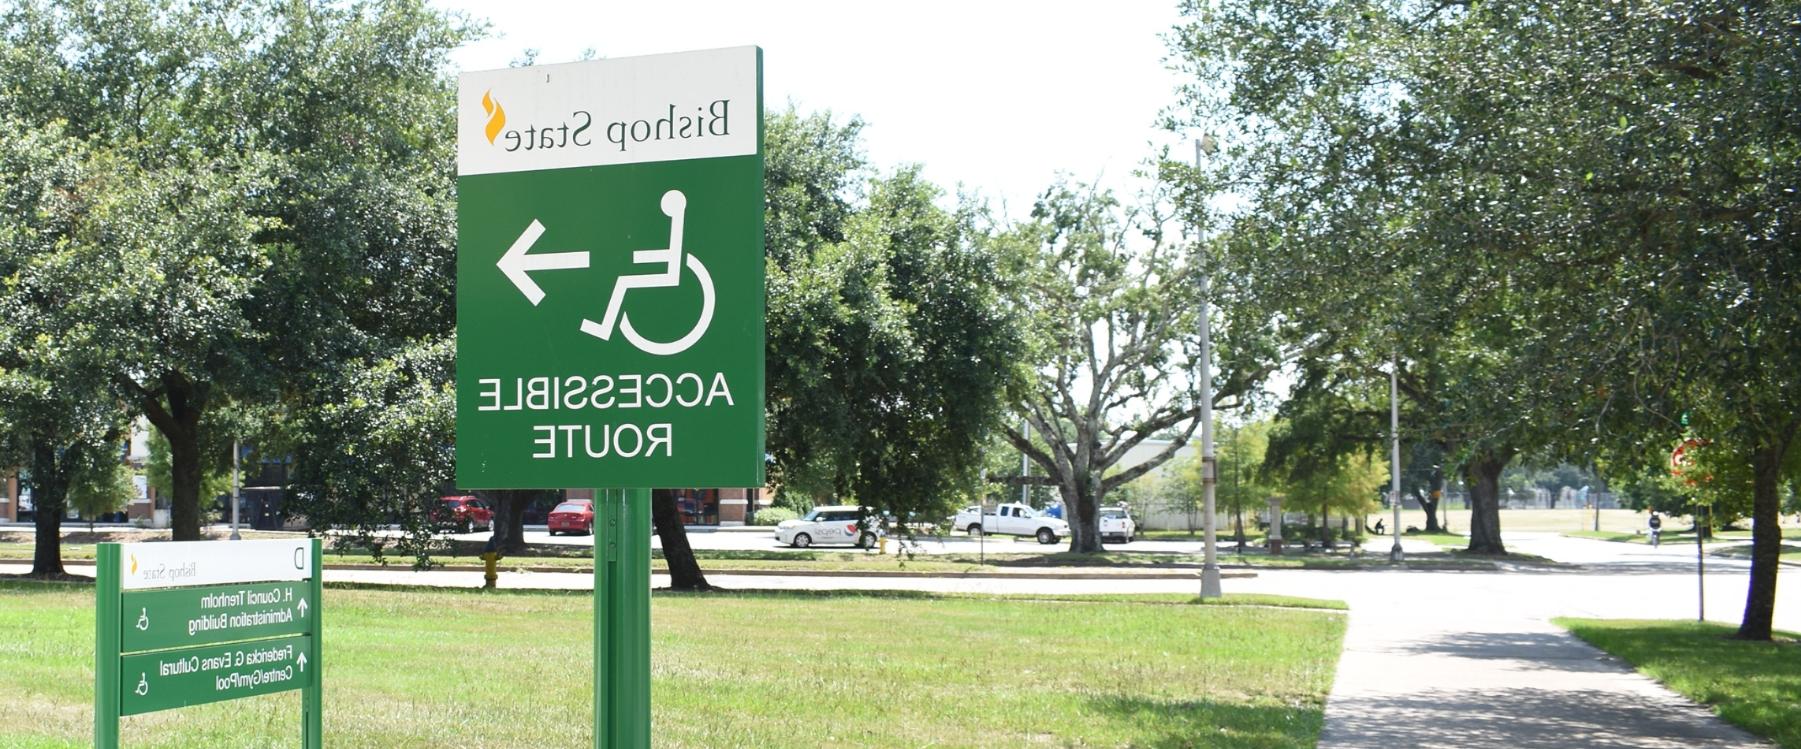 Outdoor sign with Accessible Route written